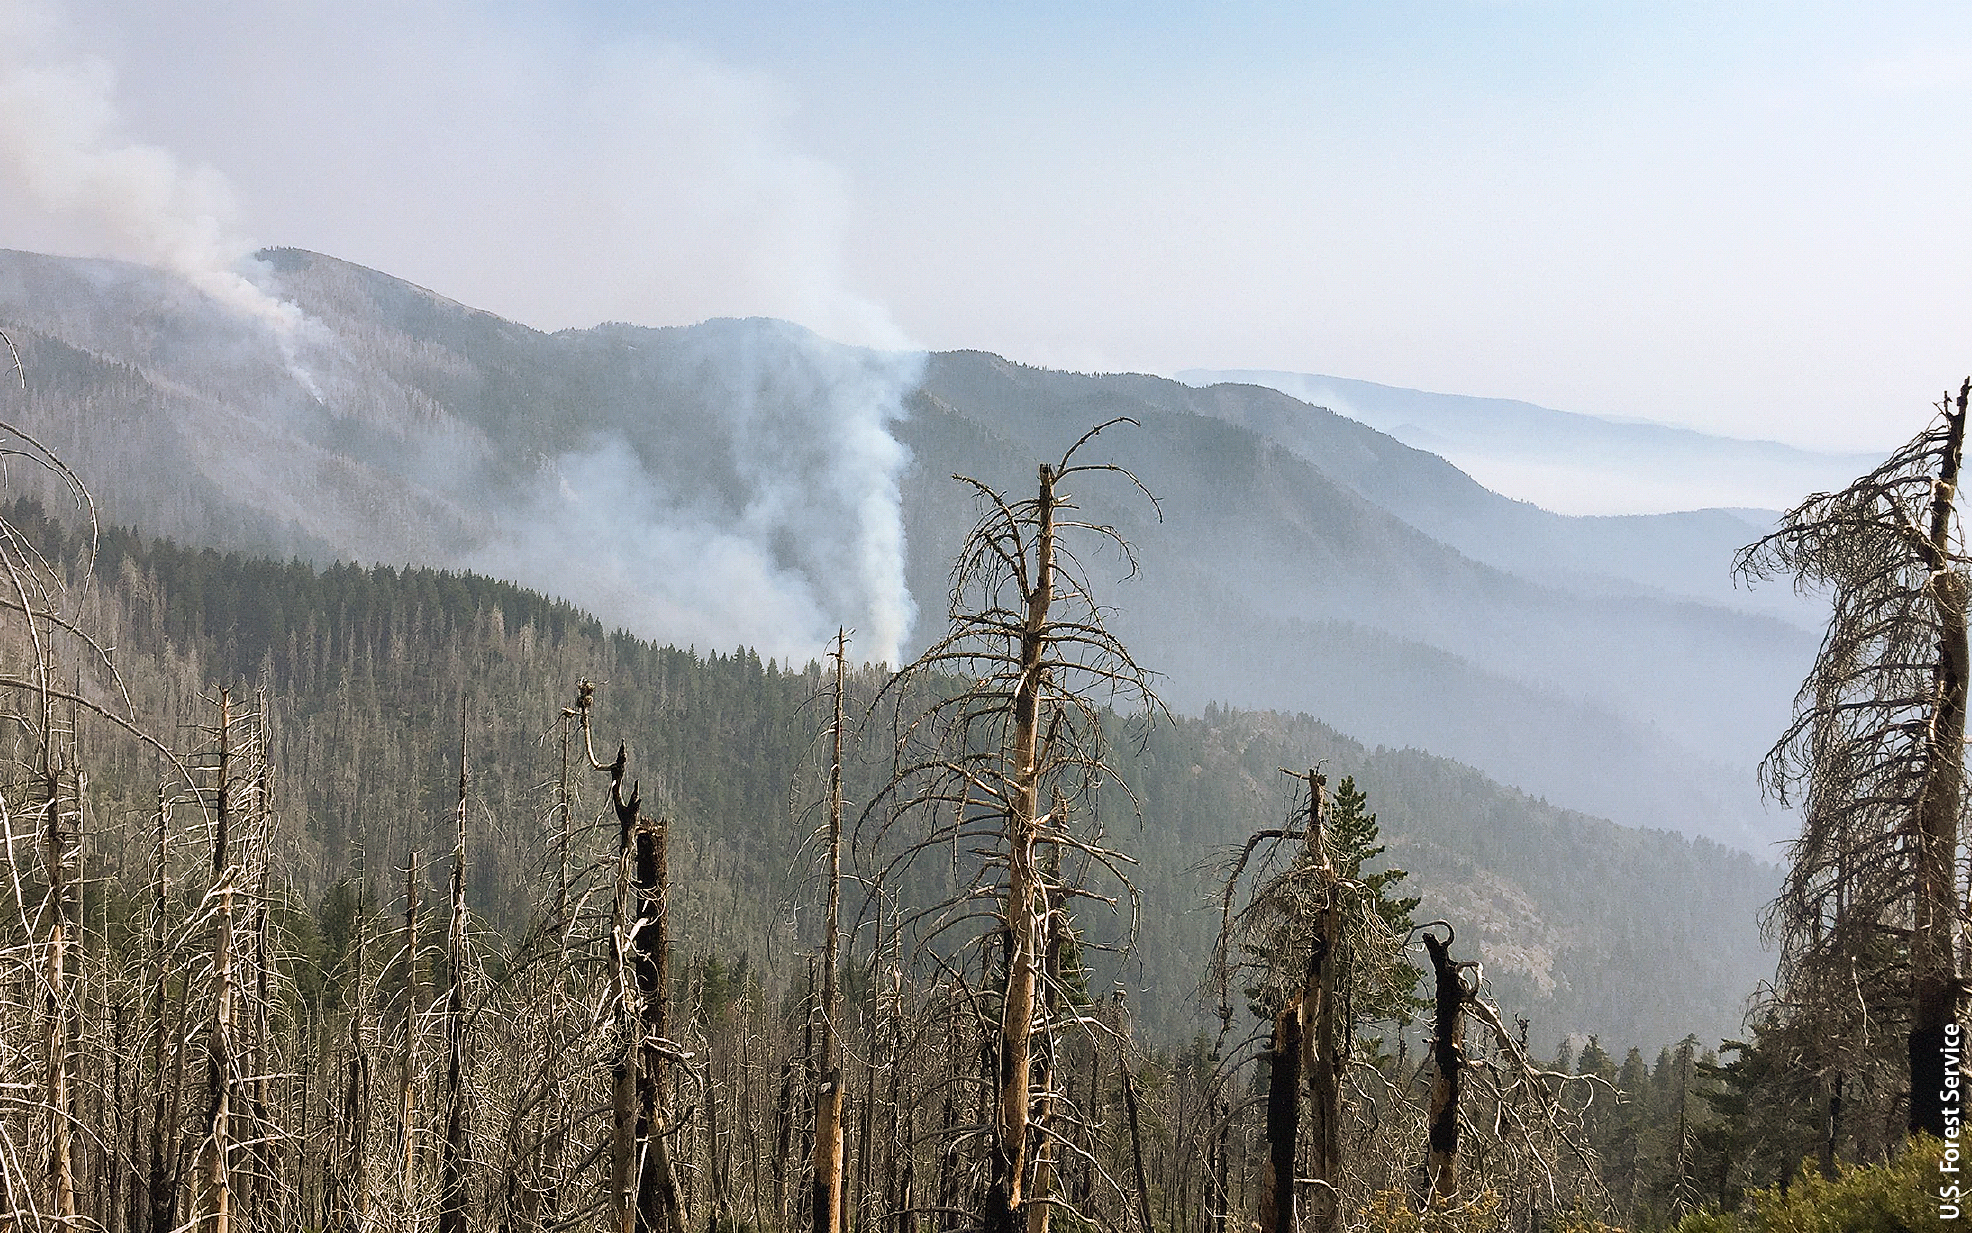 The Gasquet Complex Fire, which was caused by lightning in the Six River National Forest in California on Jul. 31, had consumed over 30,000 acres as of Sep. 14.